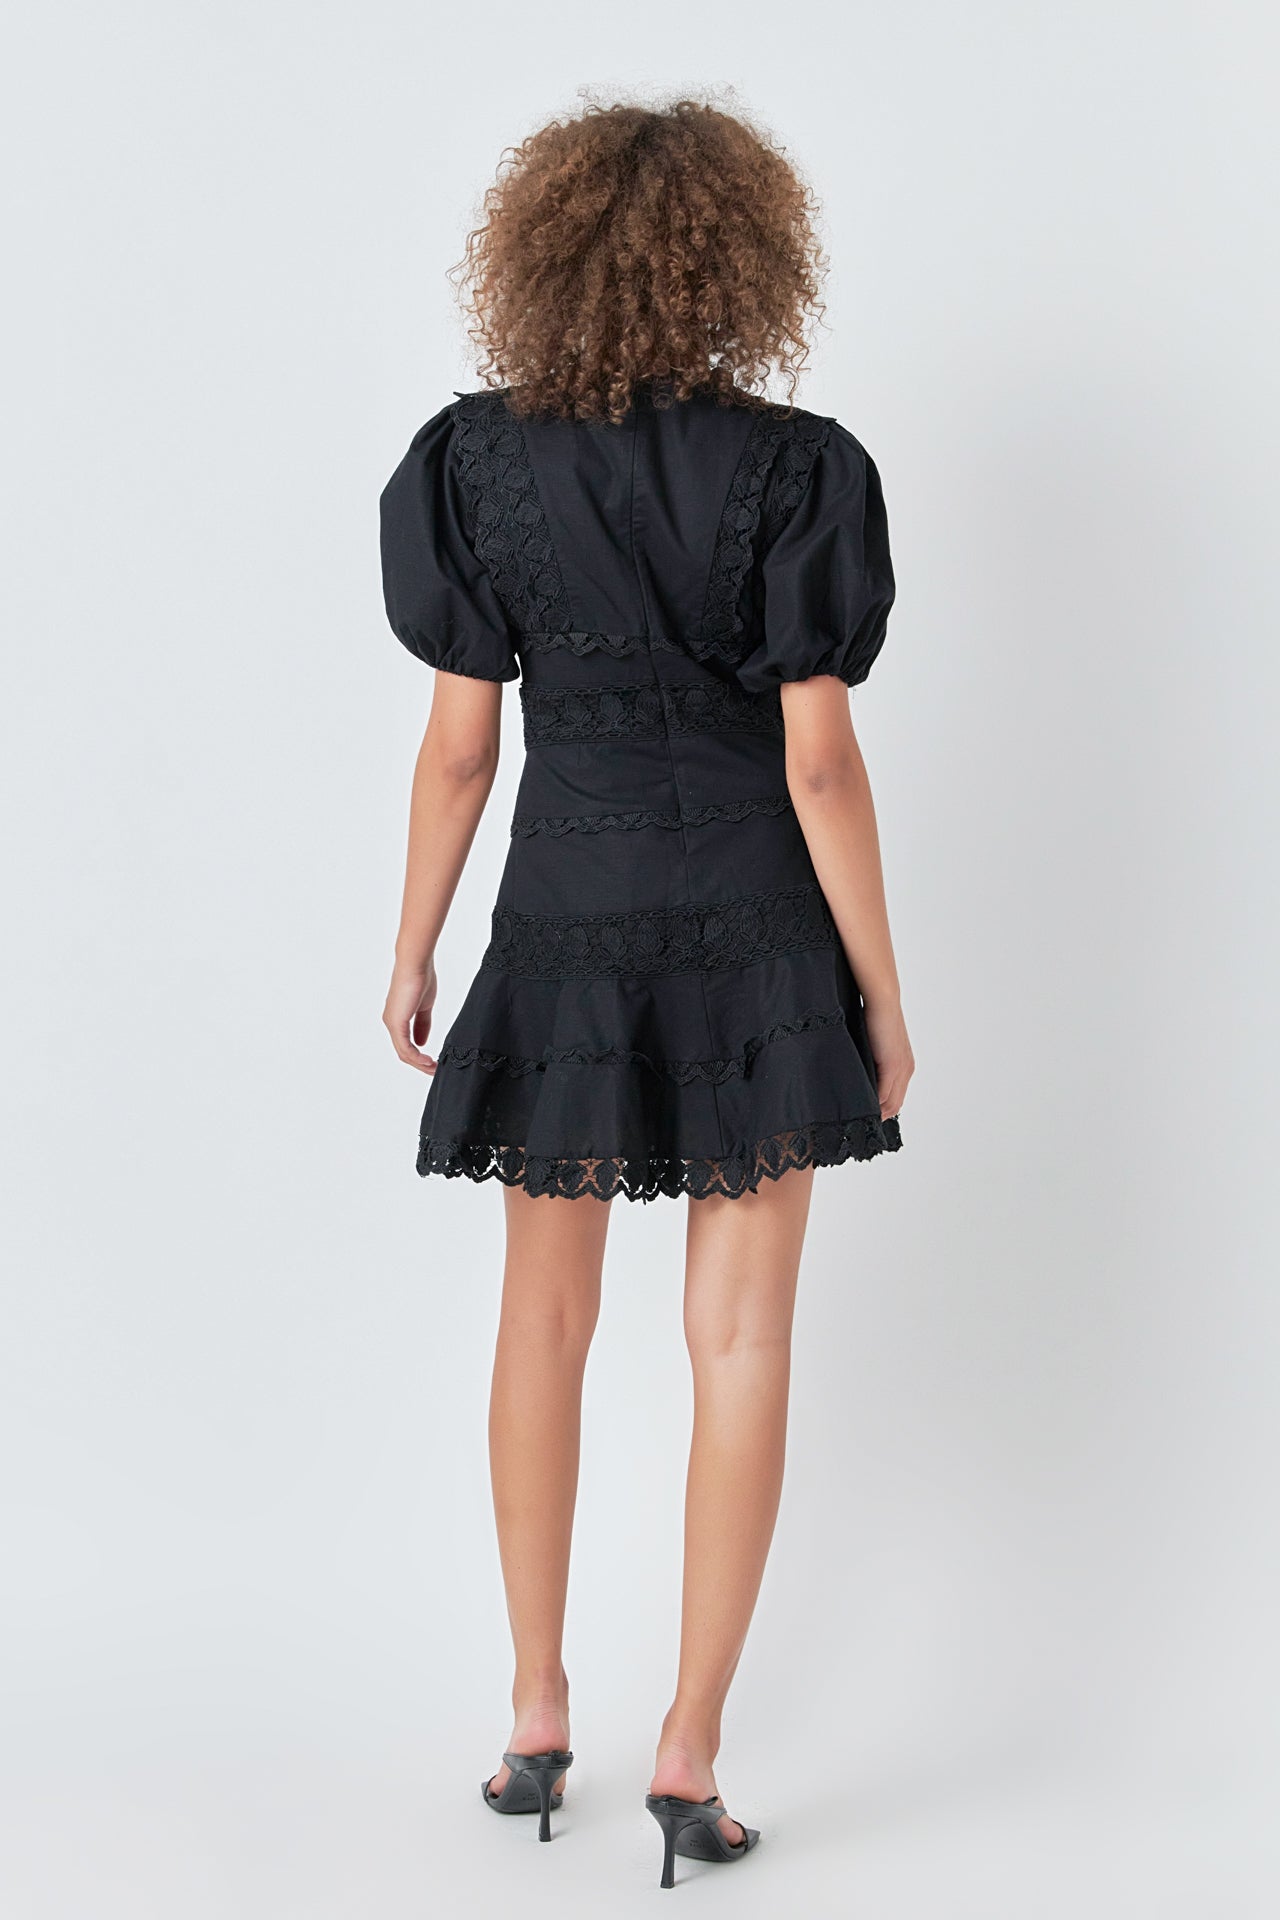 ENDLESS ROSE - Plunging Lace Trim Dress with Puff Sleeve - DRESSES available at Objectrare